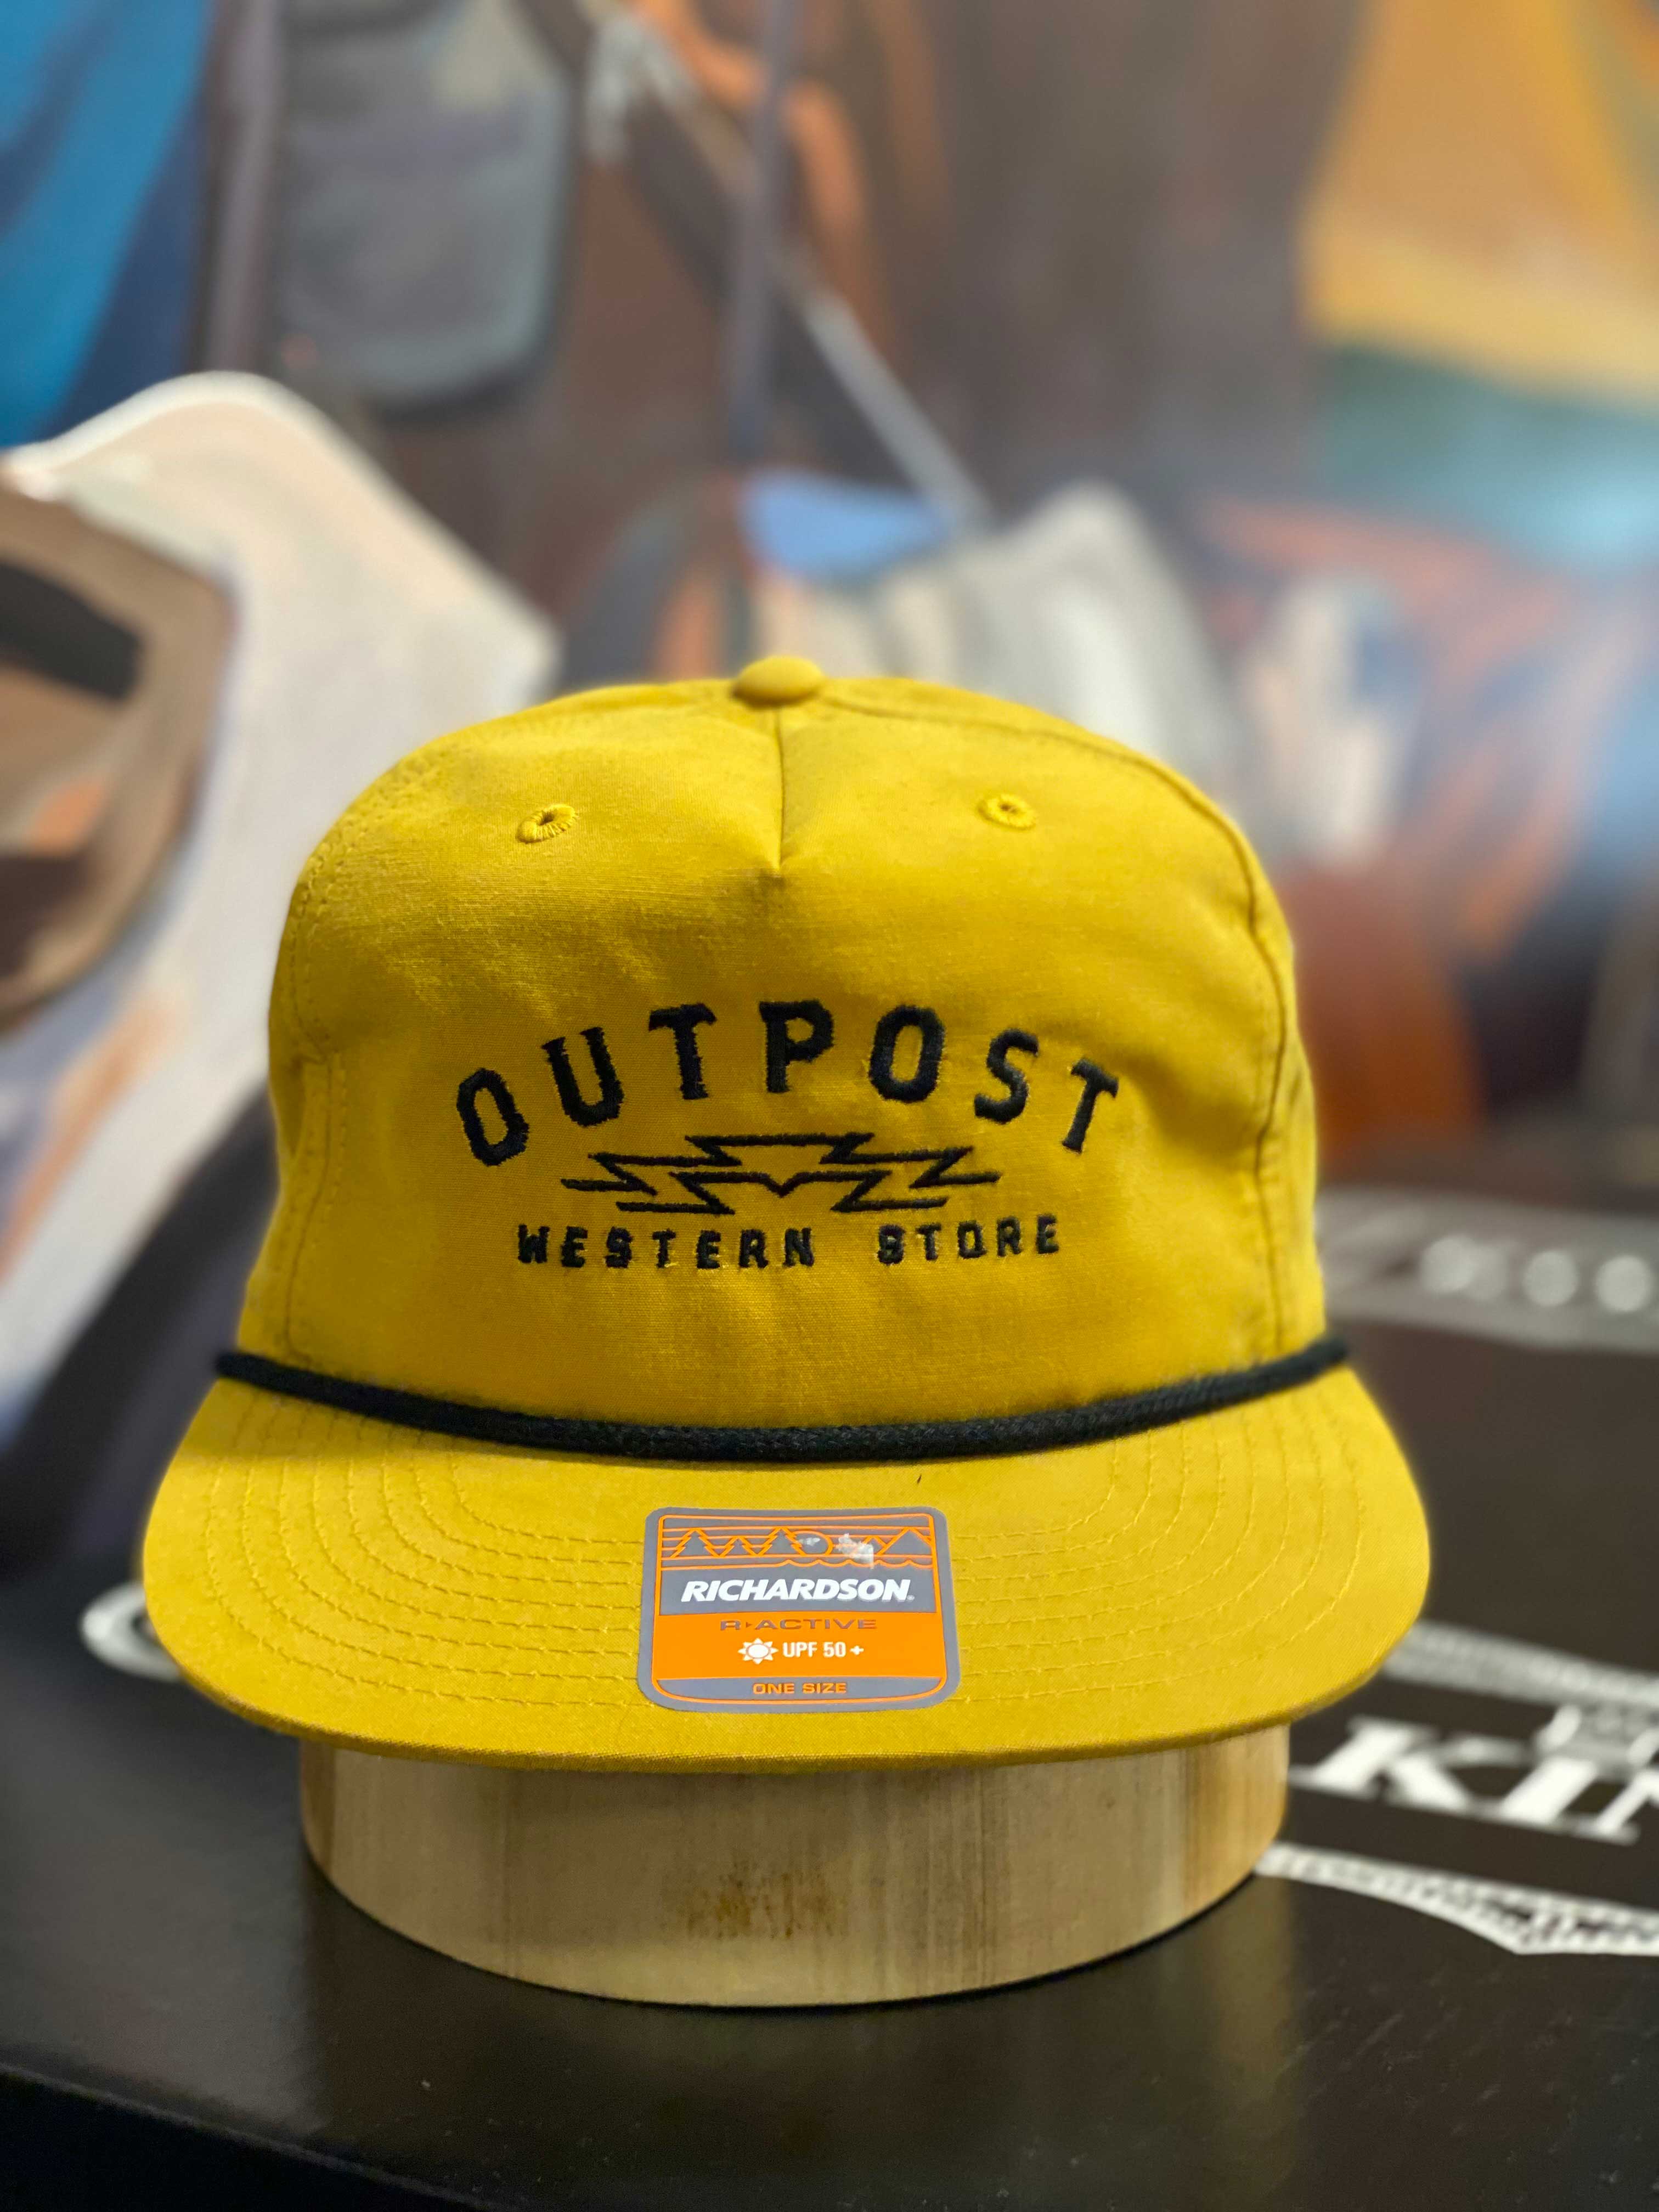 Outpost Sunrise Richardson Rope Cap – Outpost Western Store